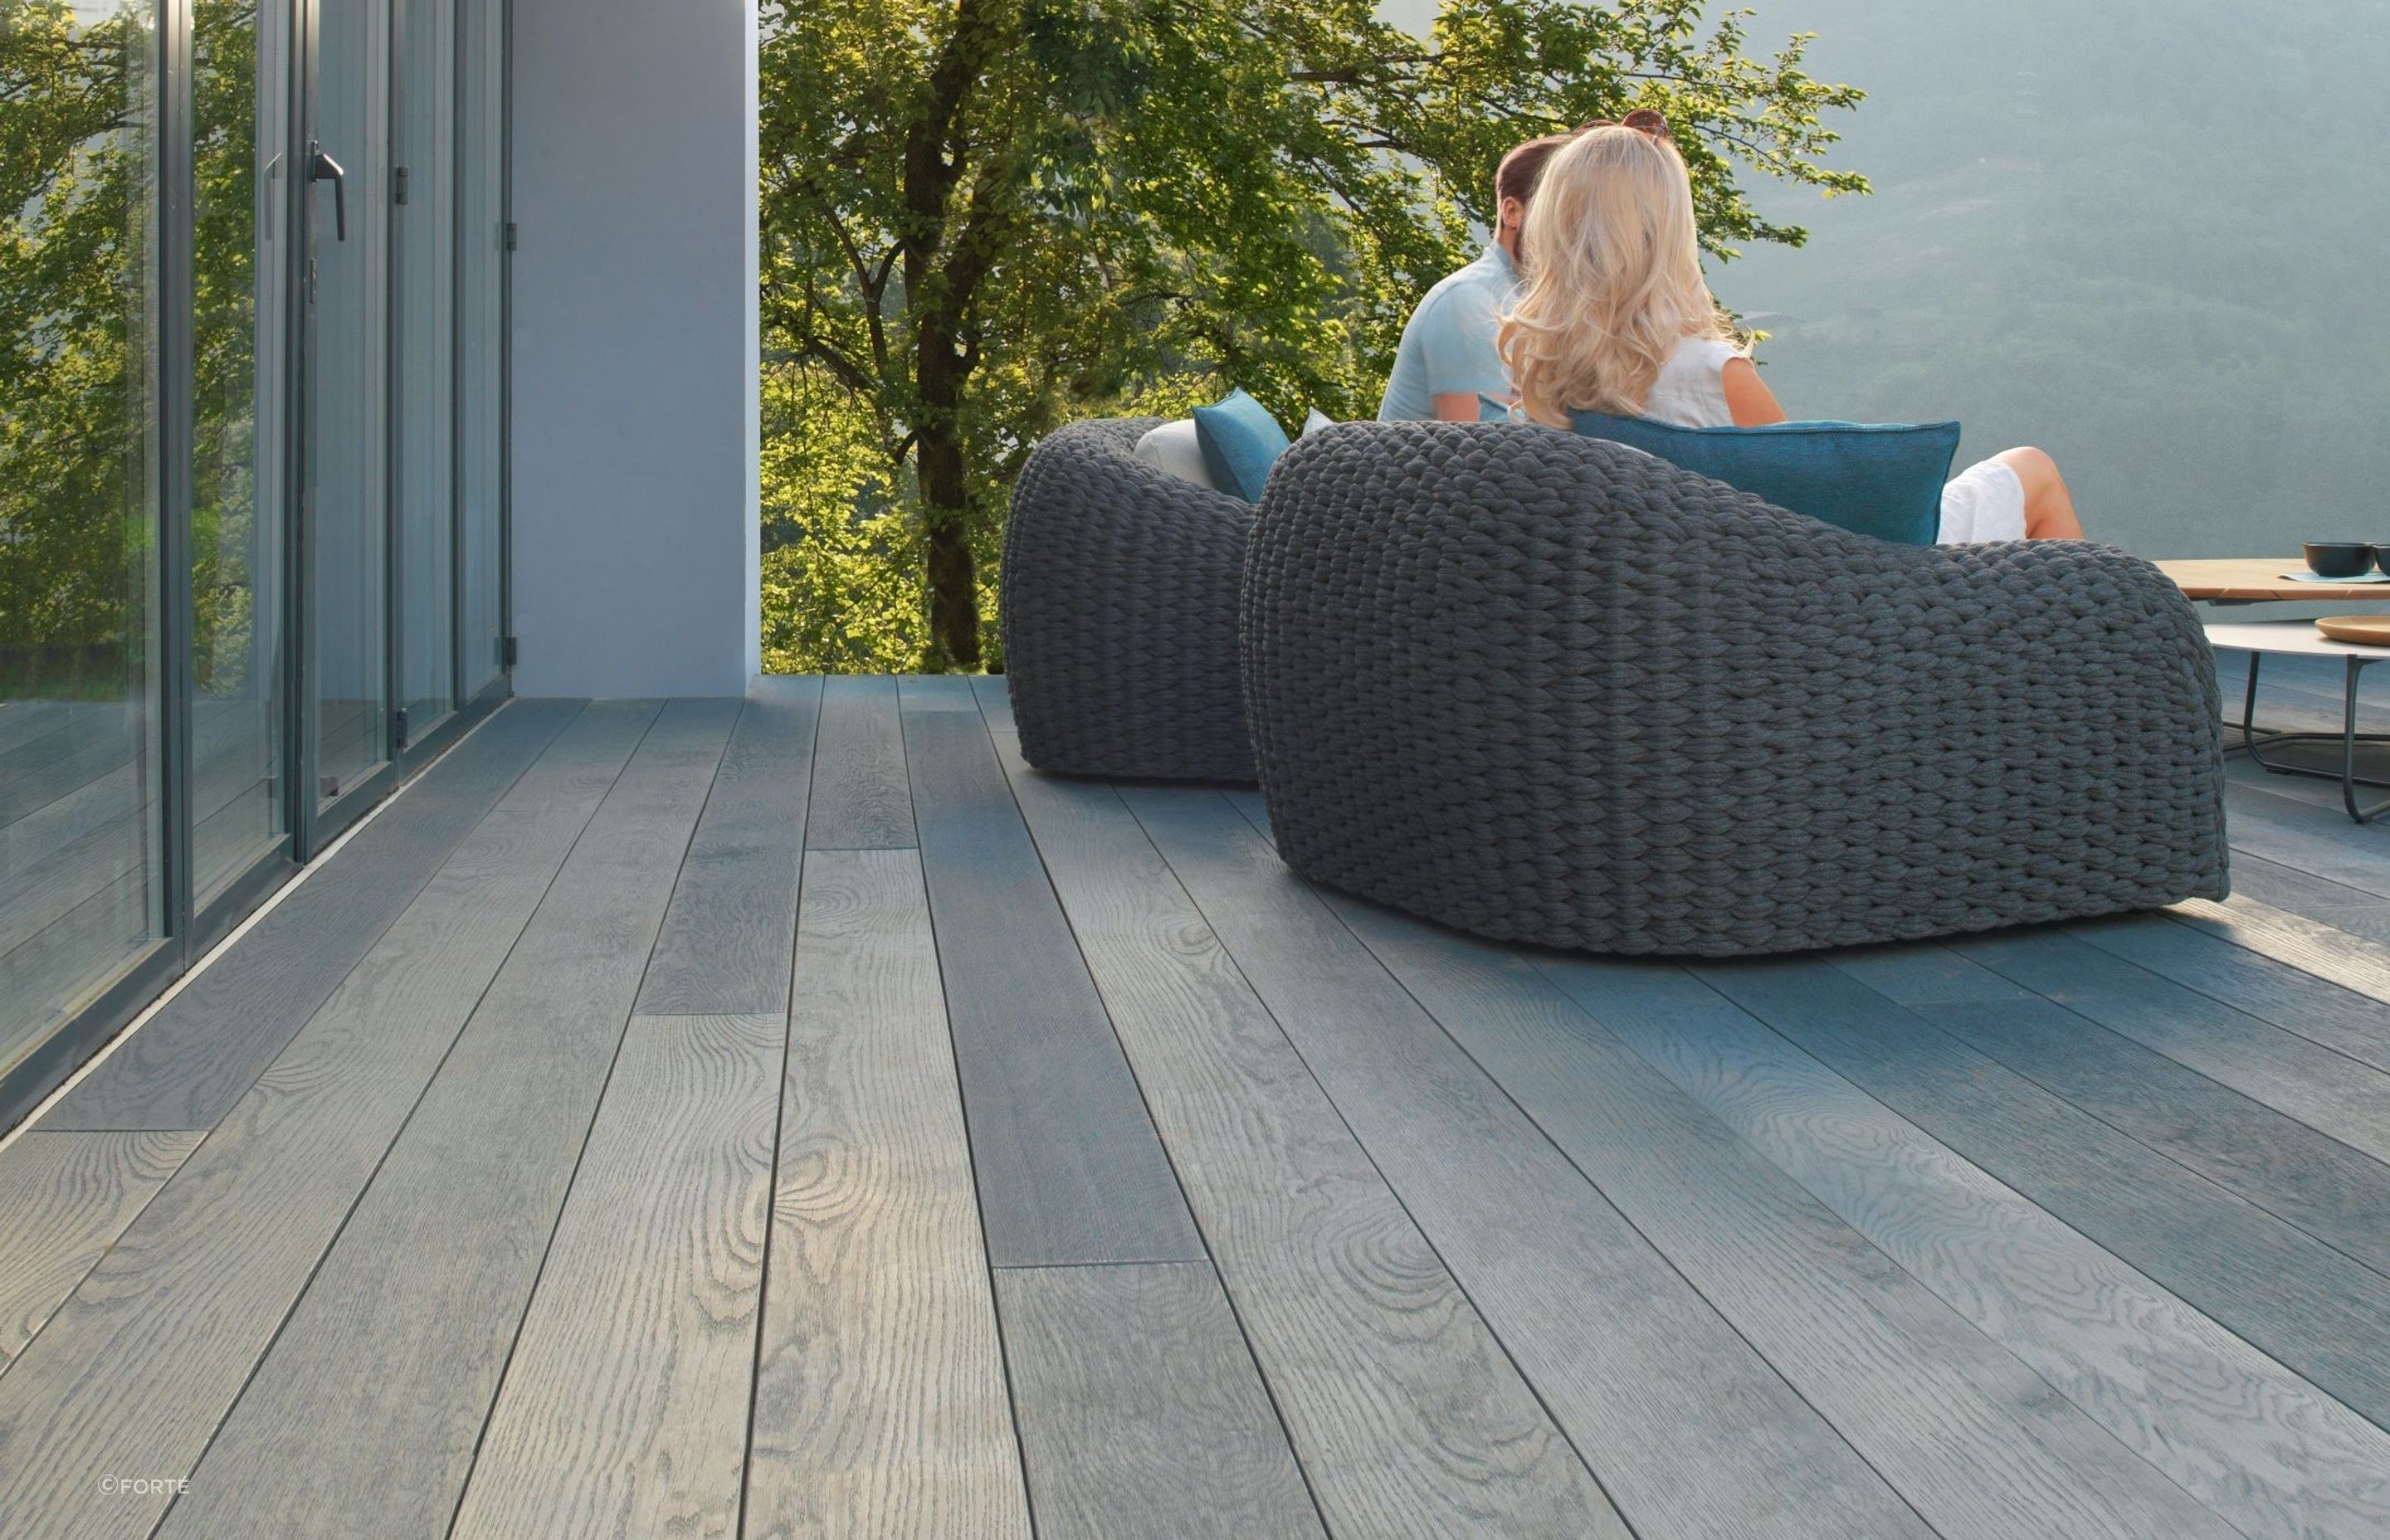 Millboard Brushed Basalt is one of the most authentic painted-wood-look decking boards available.